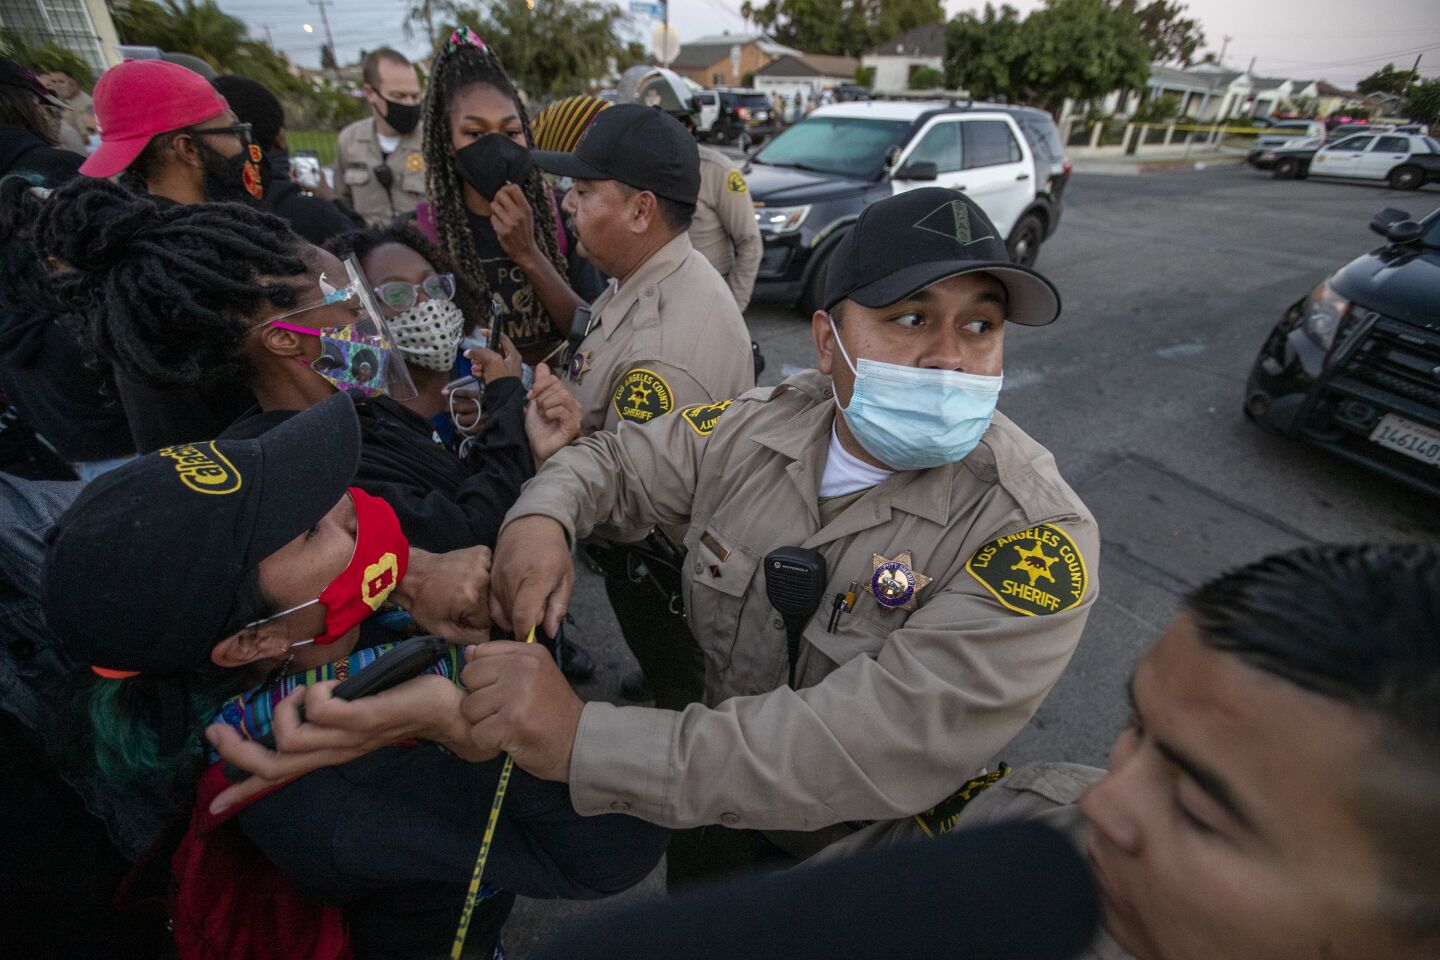 Residents face off with L.A. County sheriff's deputies.